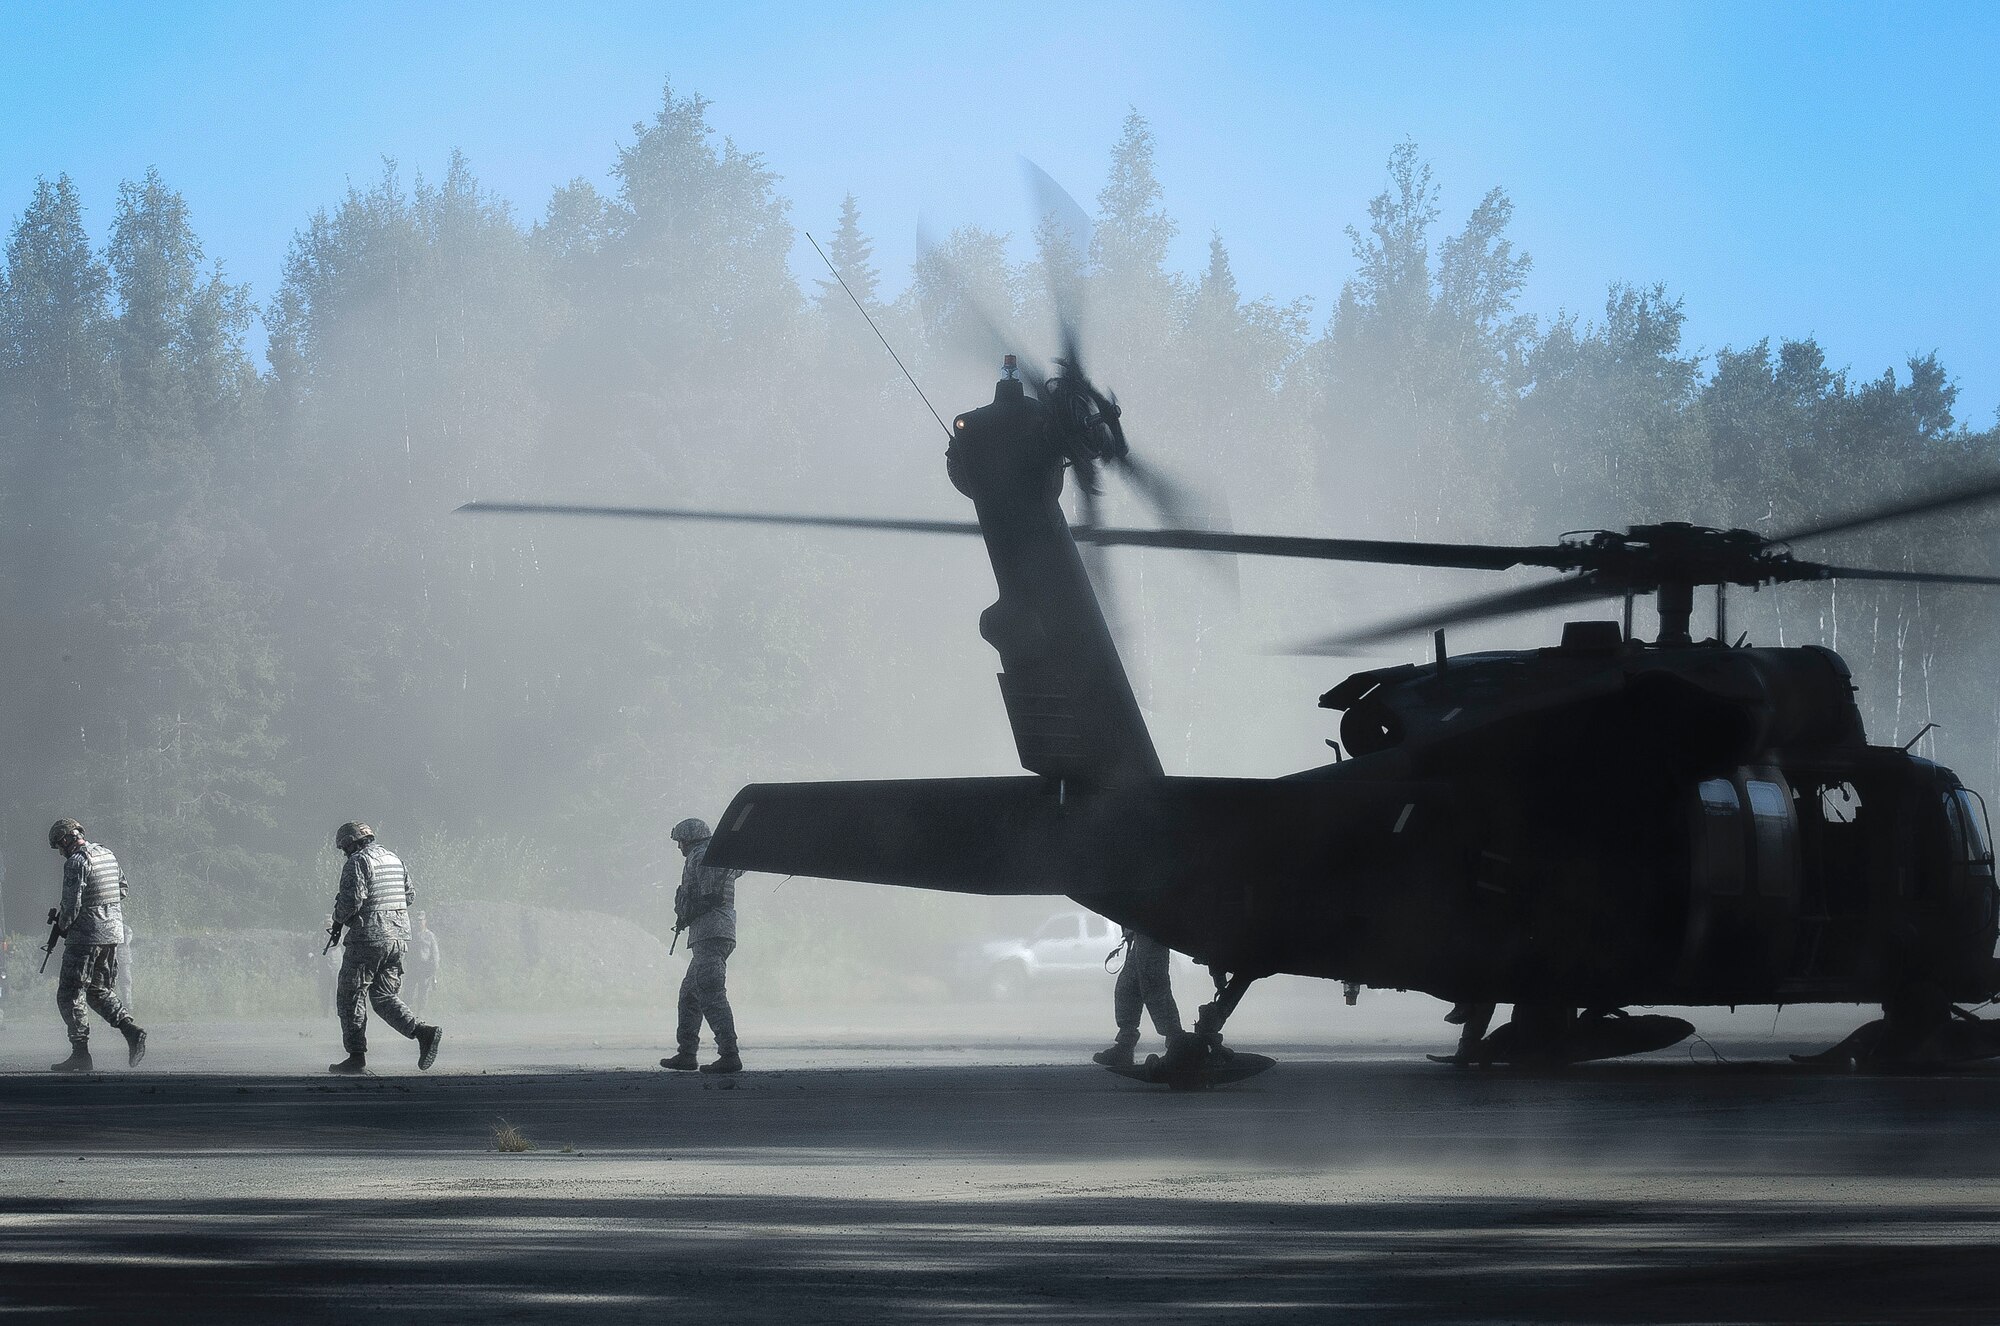 JOINT BASE ELMENDORF-RICHARDSON, Alaska -- Guardsmen from the 179th Security Forces, Ohio Air National Guard, exit a Black Hawk helicopter from the 1st Battalion, 207th Aviation Regiment, Alaska Army National Guard, on Joint Base Elmendorf-Richardson July 24. The Ohio Guardsmen were practicing insertion techniques that is important for deployment preparation during their annual training. U.S. Army National Guard image by Sgt. Edward Eagerton/Released